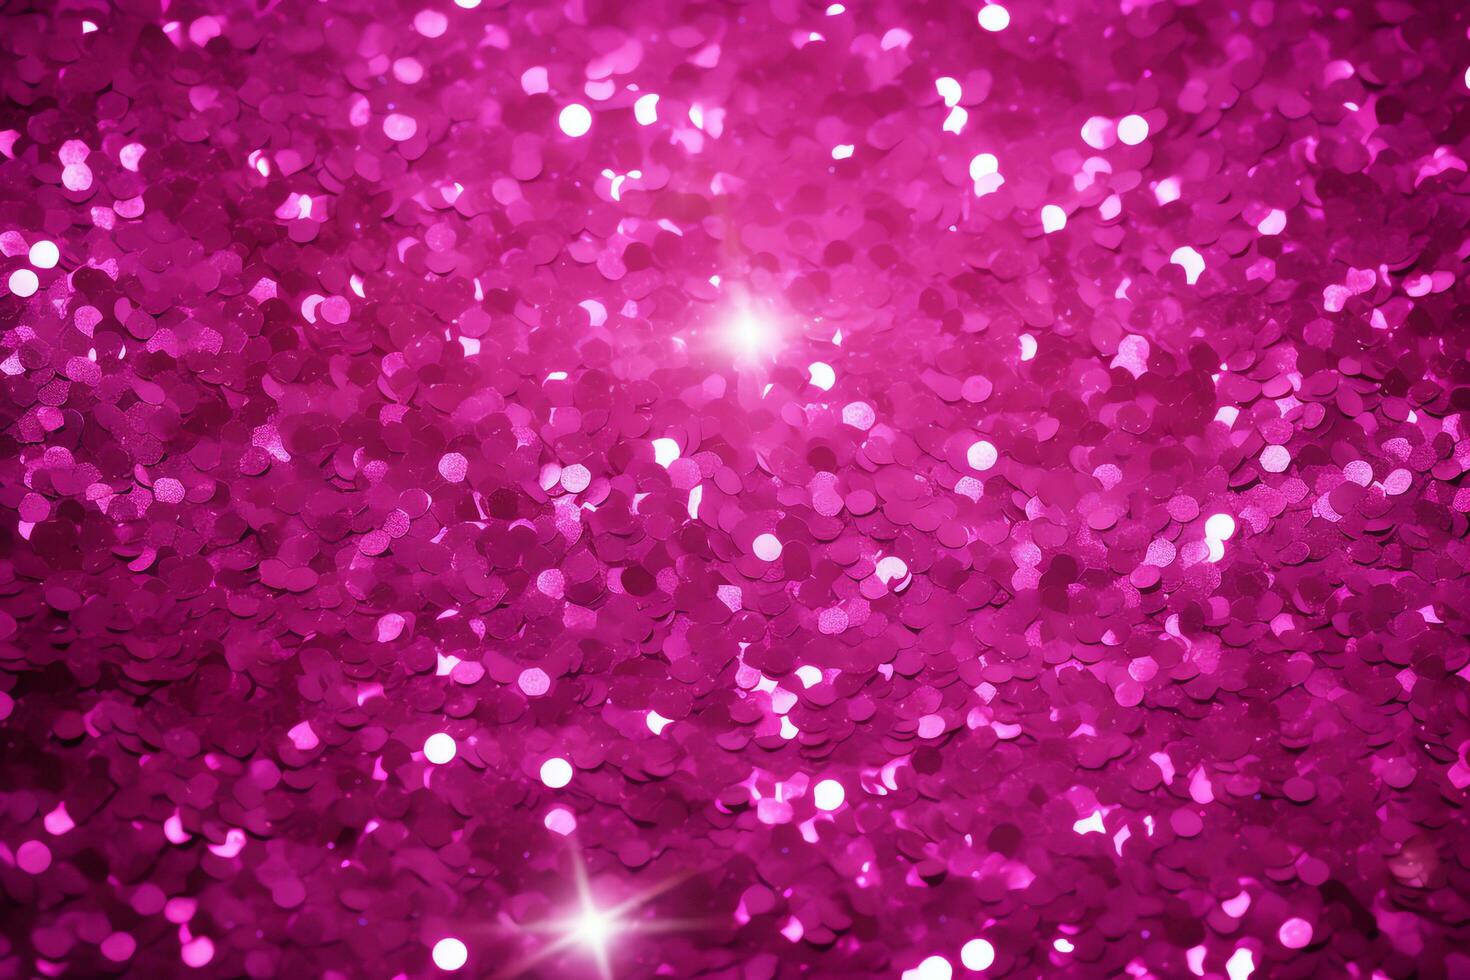 Hot Pink Glitter Stock Photos, Images and Backgrounds for Free Download